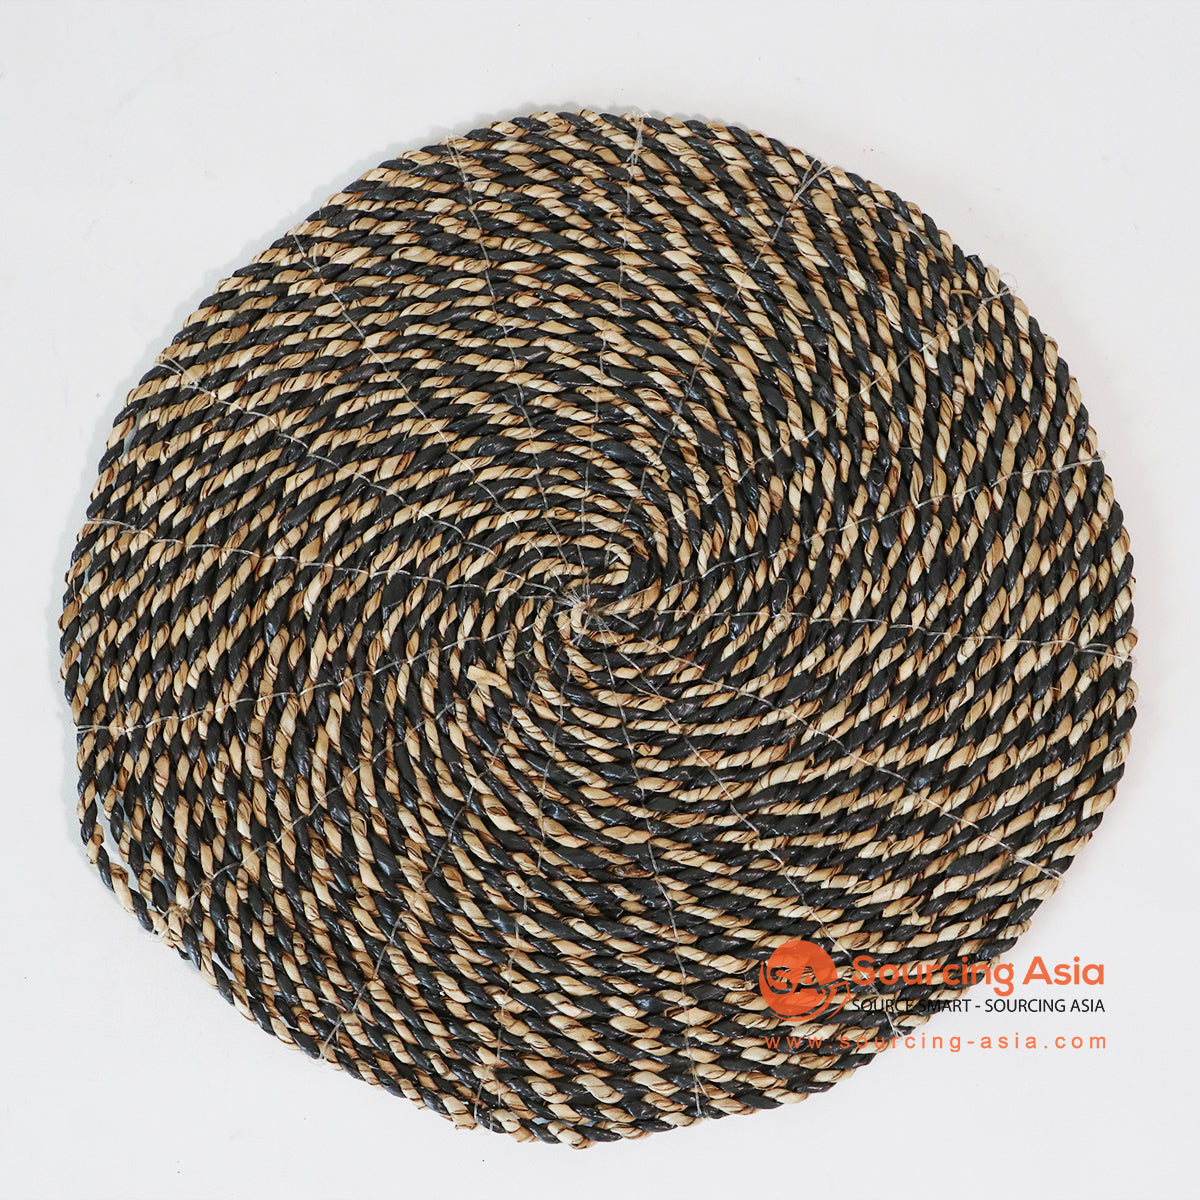 MTIC031 BLACK AND NATURAL WOVEN SEAGRASS PLACEMAT